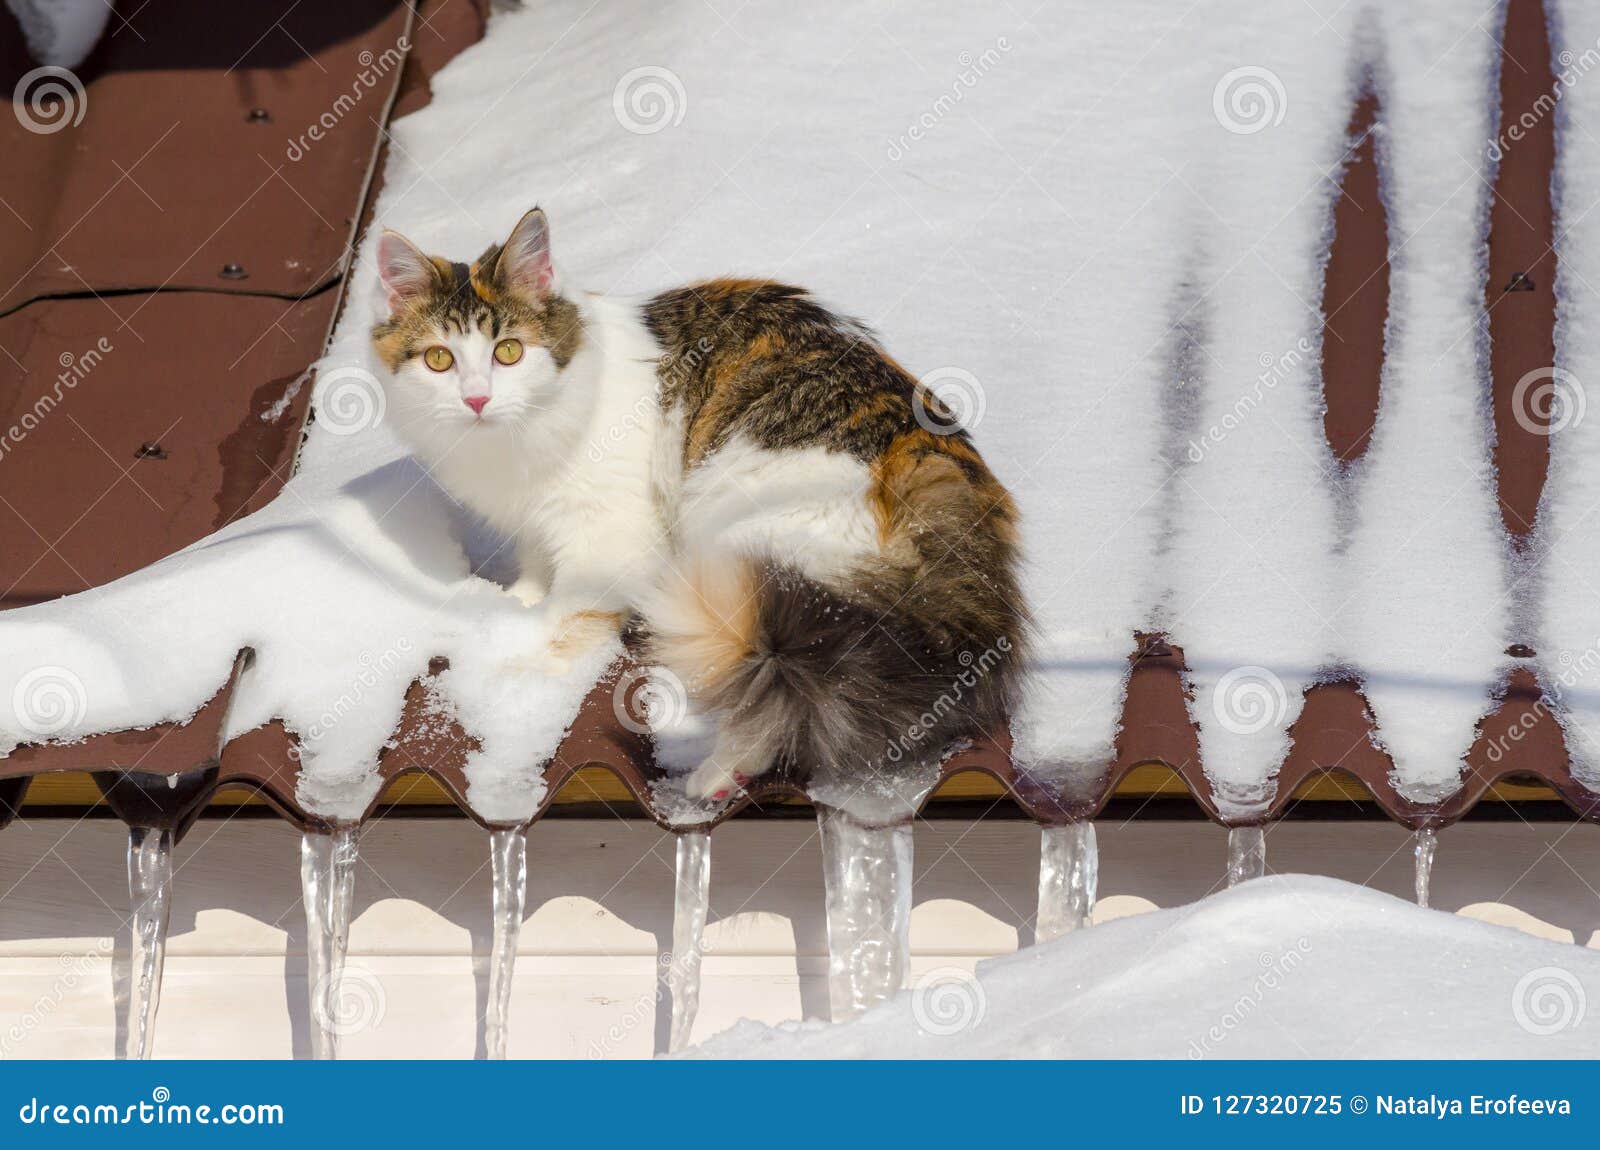 Beautiful Calico Cat Walking On Snowy Roof Of The House Kitty Sitting On The Roof Top On A Sunny Christmas Day Stock Image Image Of Downy Attentive 127320725